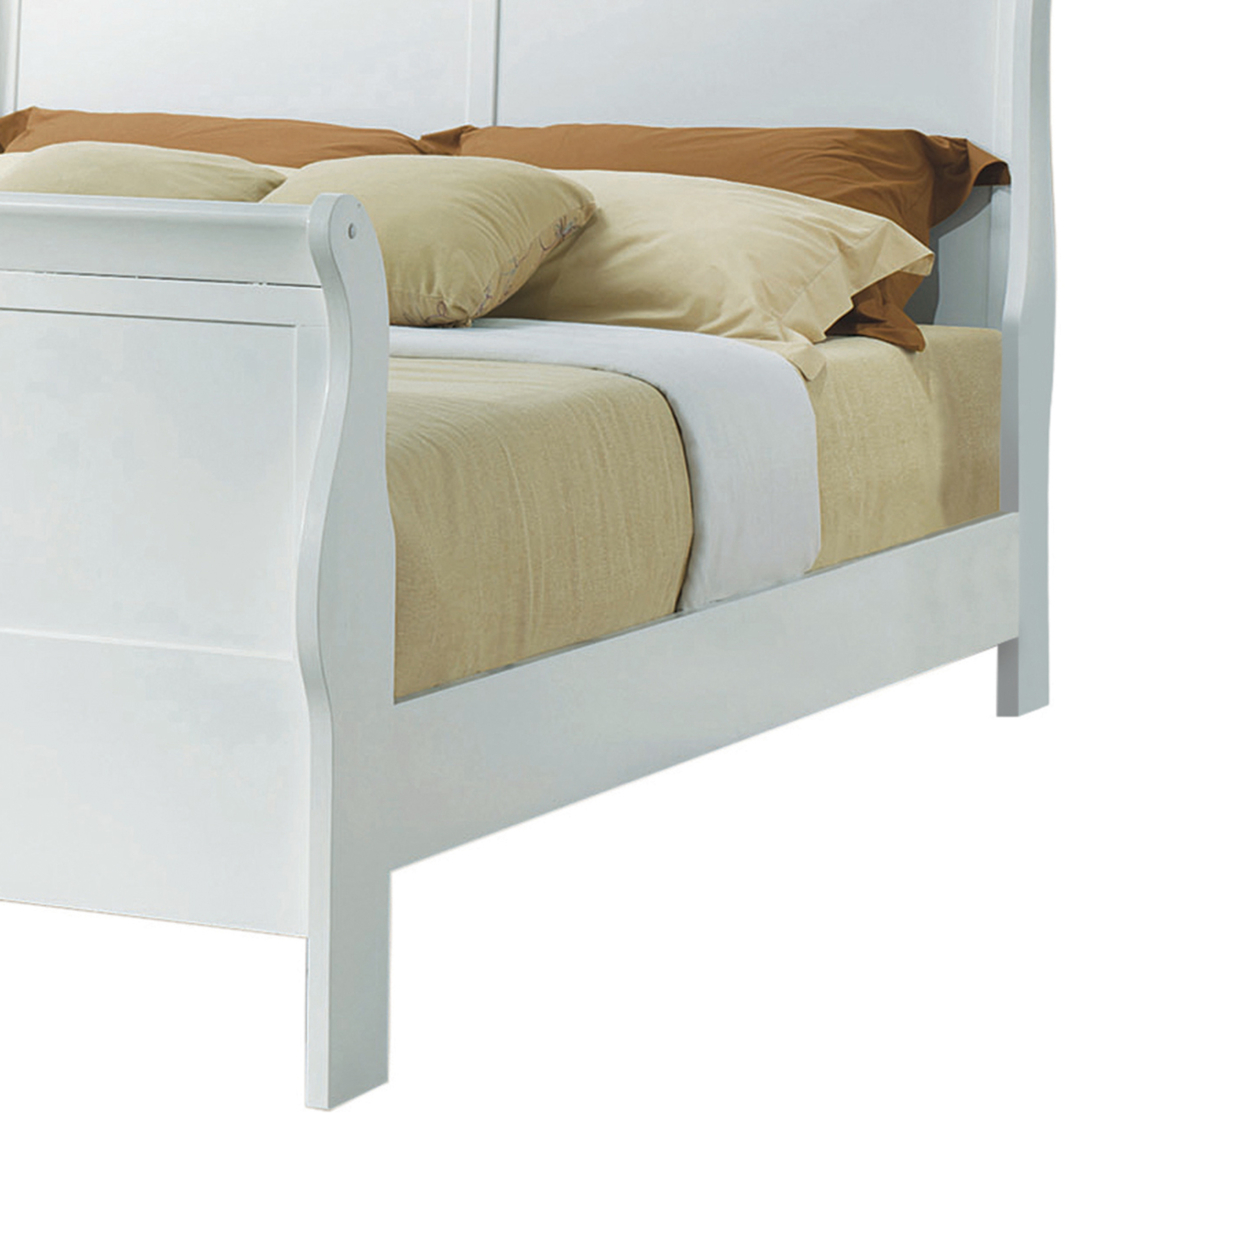 Transitional Wooden Queen Size Bed With Panel Head And Footboard, White- Saltoro Sherpi